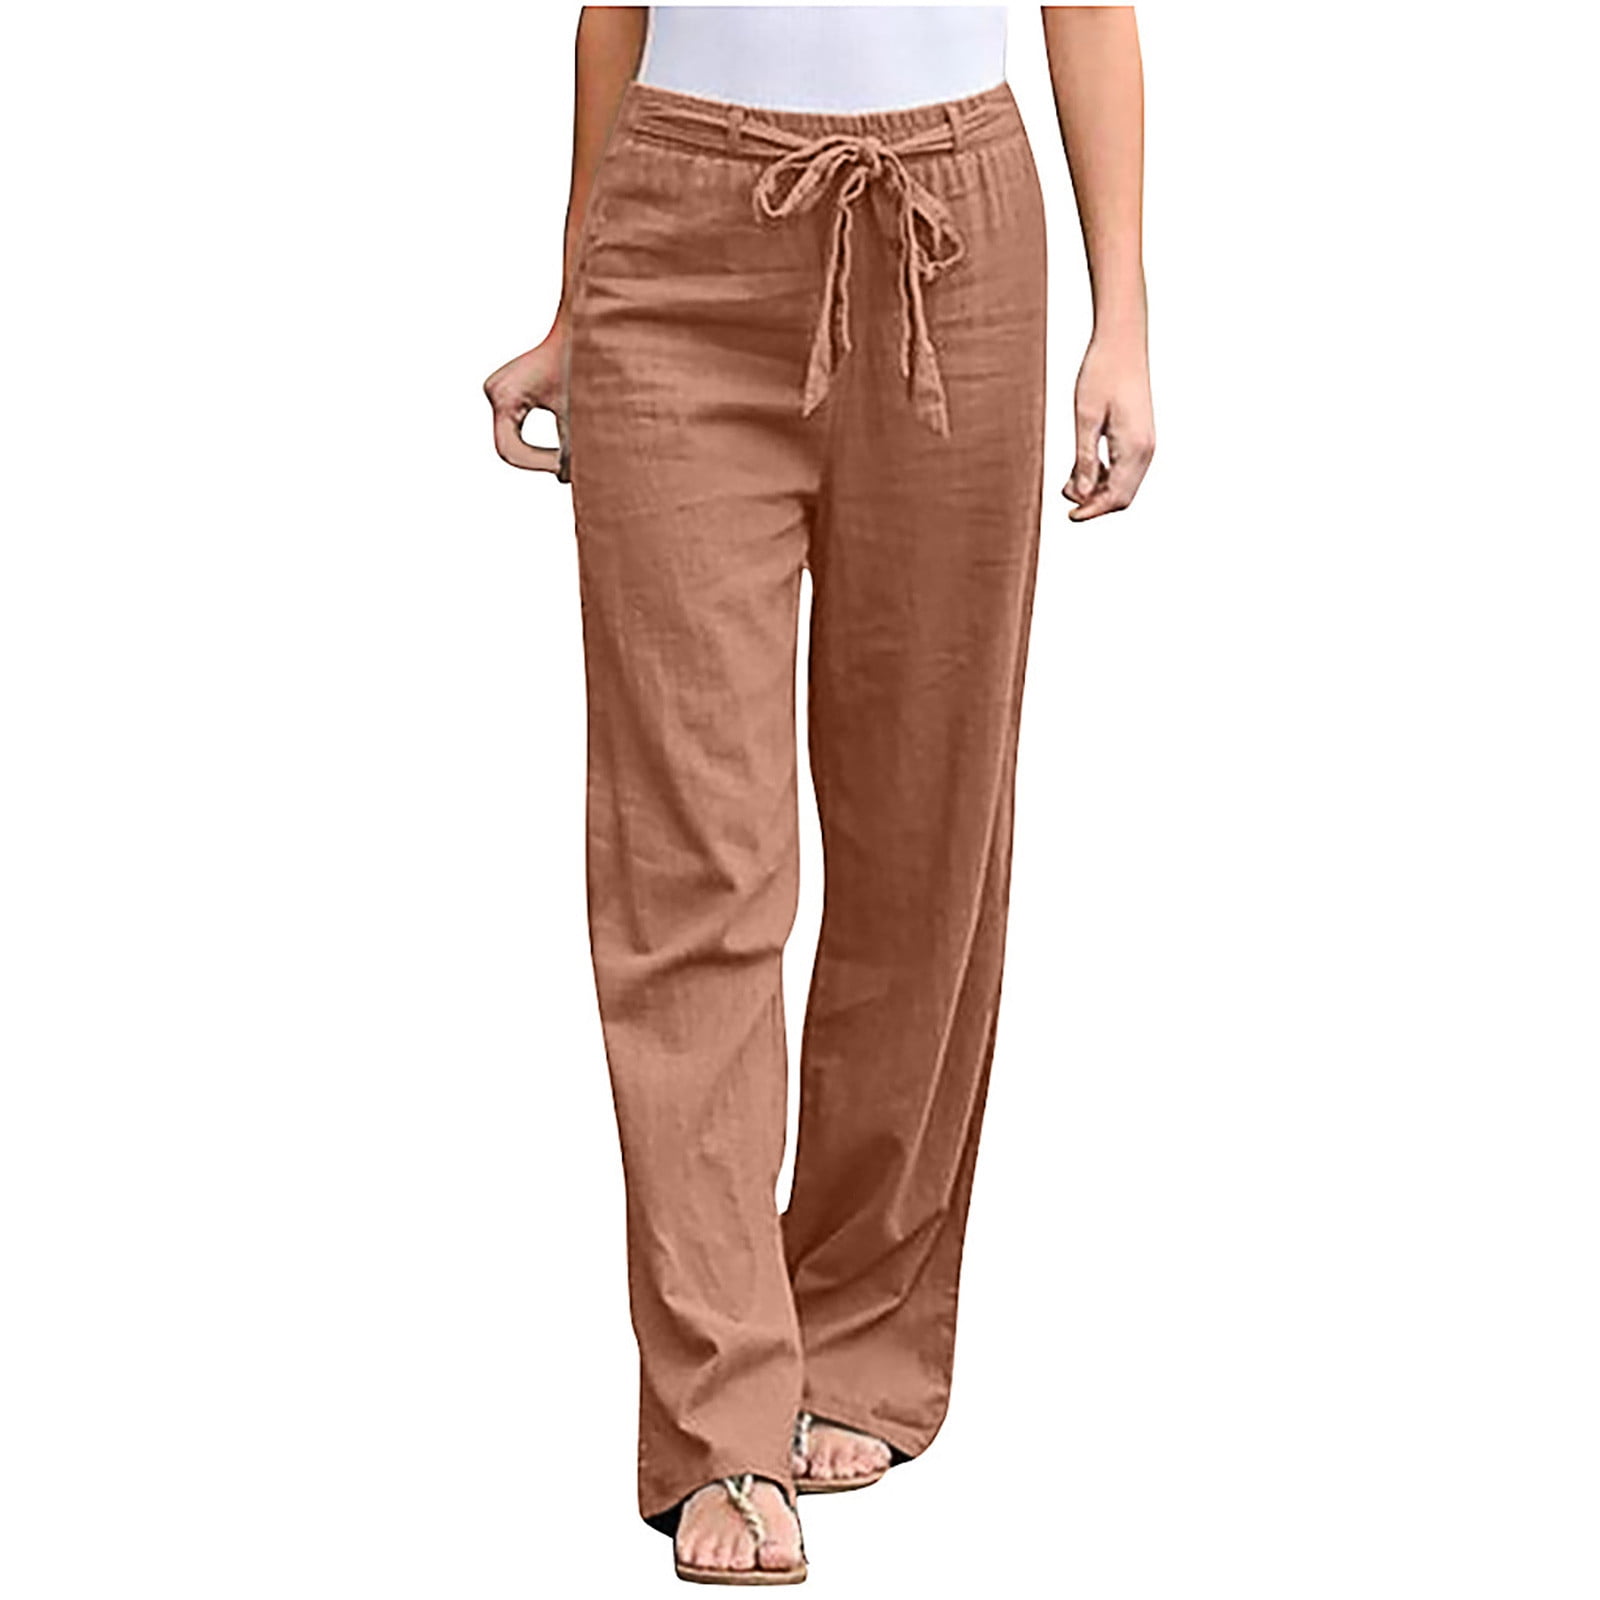 gakvbuo Linen Pants For Women High Waisted Pants Drawstring Elastic Business  Casual Pants Work Pants Paper Bag Pants Loose Flowy Dress Pants Comfy  Trousers Straight Pants With Pockets 